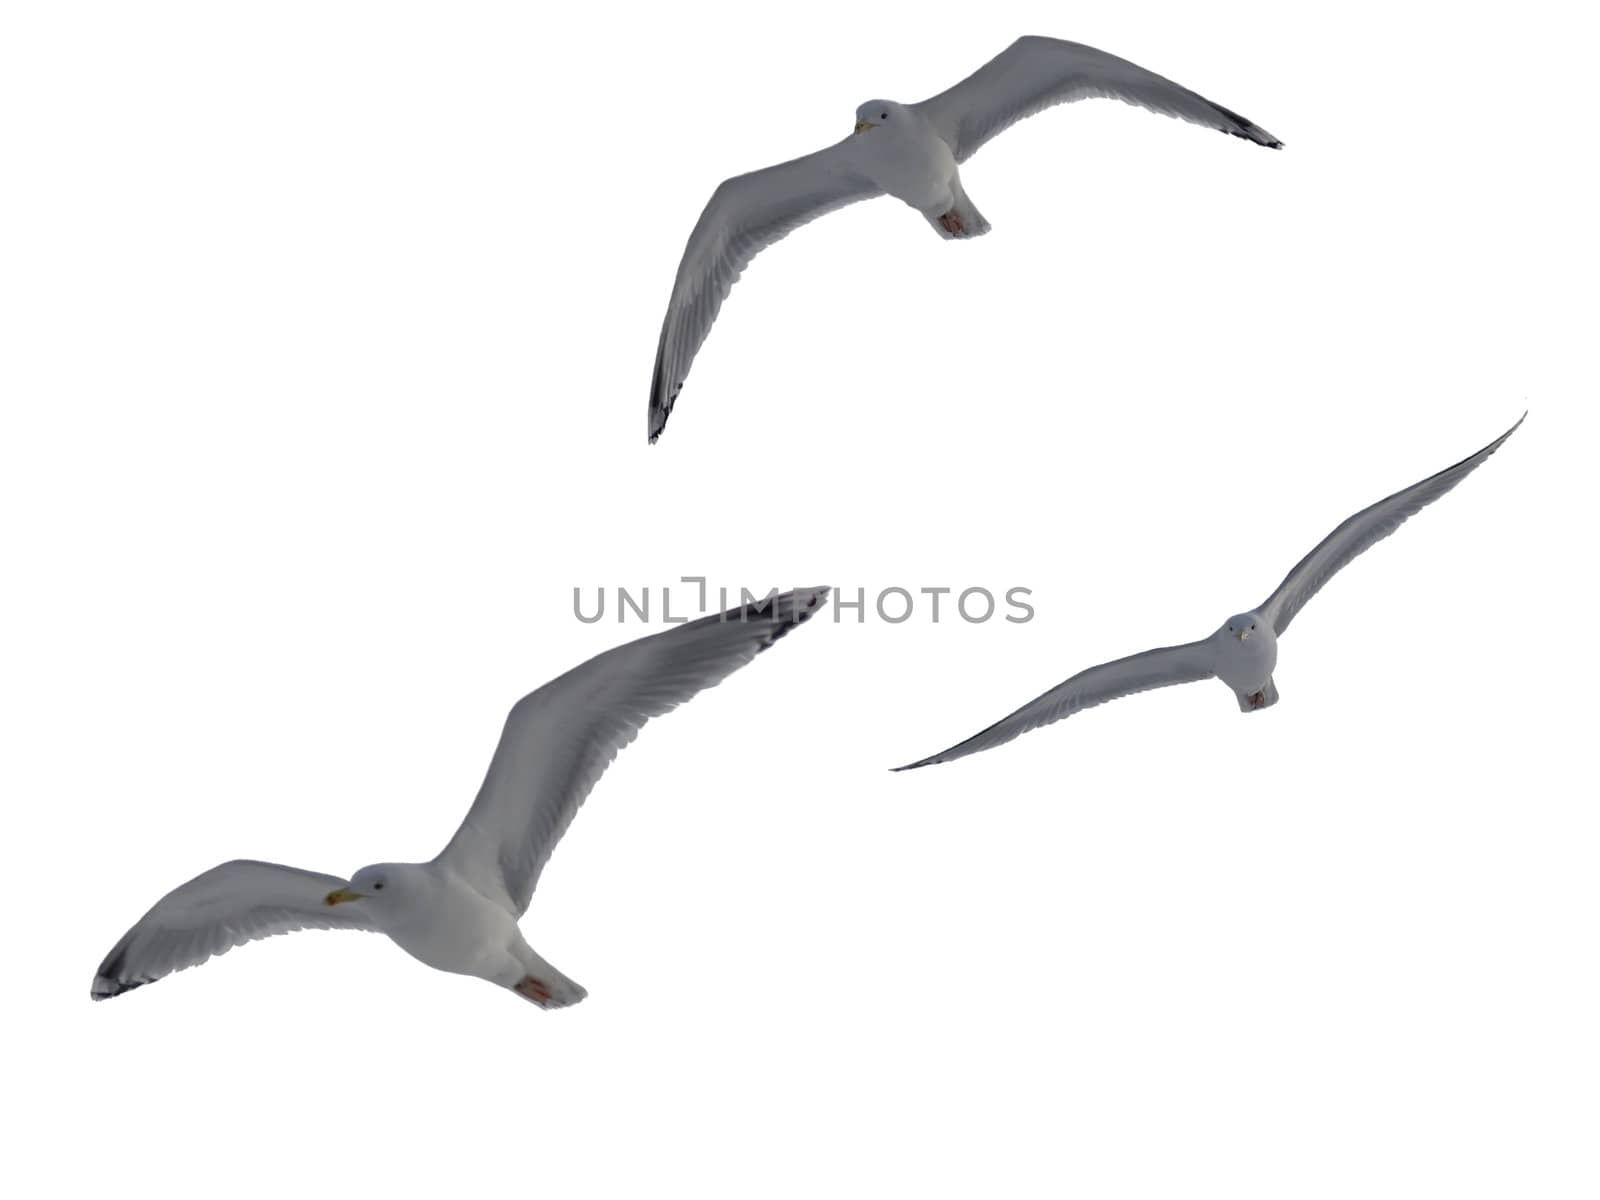 The seagull soaring on a white background